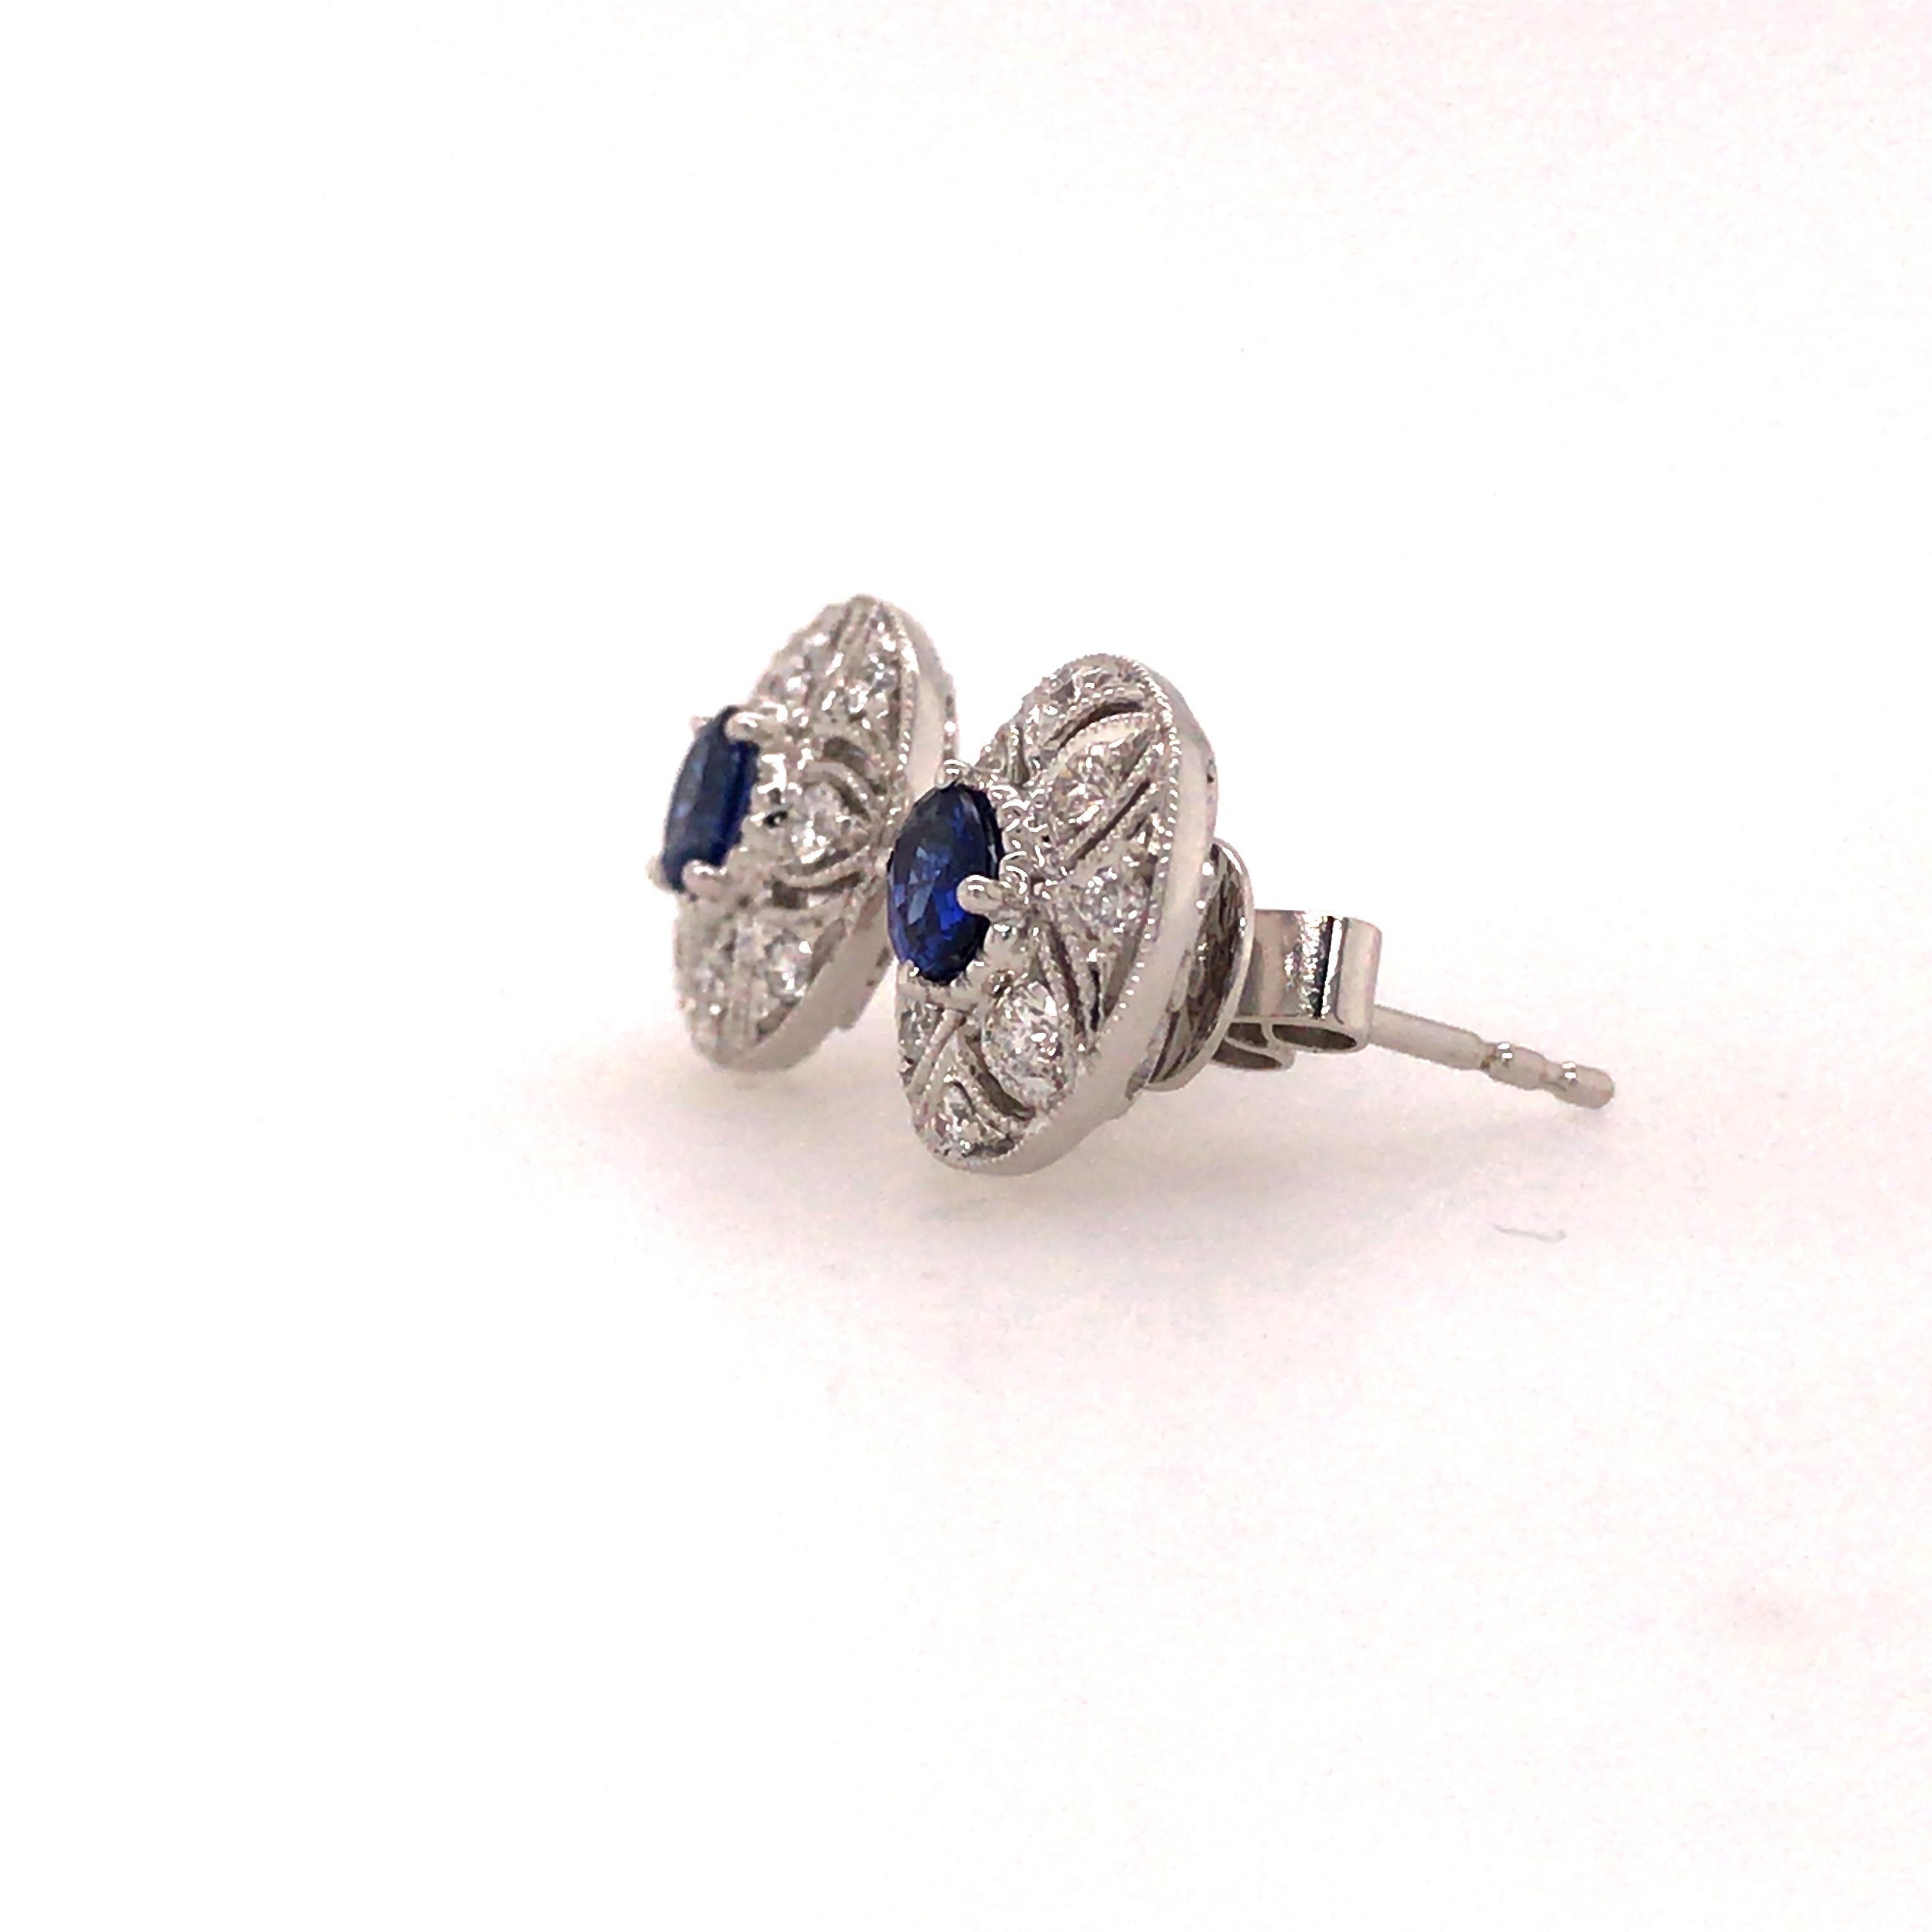 A classic beautiful pair of Sapphire and Diamond cluster earrings in 18K White Gold.  (2) Sapphires weighing .41 carat total weight are bezel set and surrounded by (16) Round Brilliant Cut Diamonds weighing .25 carat total weight, G-H in color and